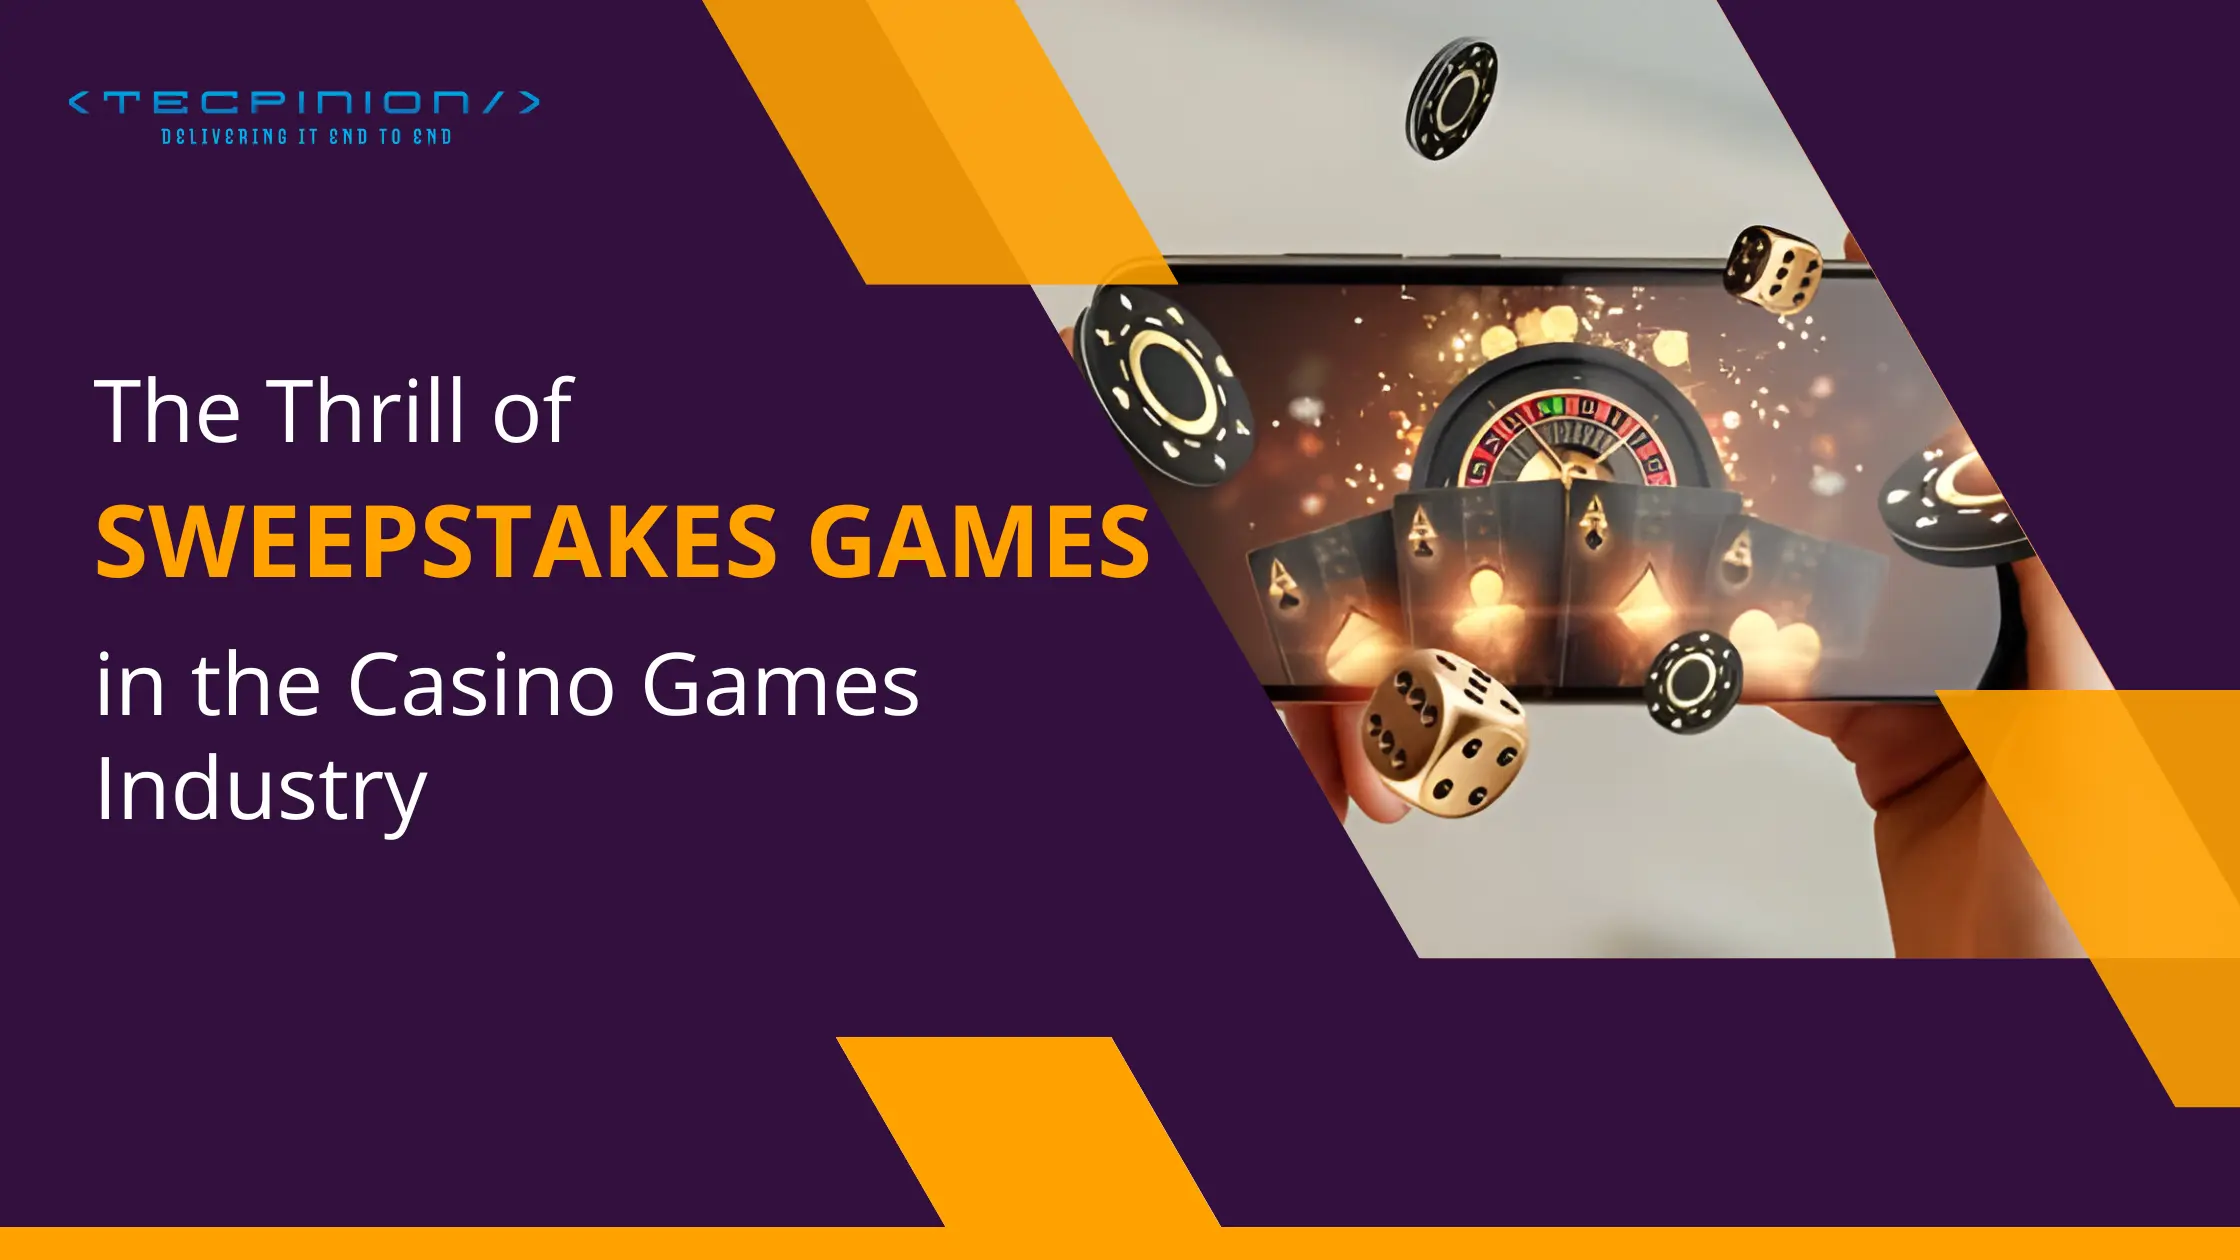 The Thrill of Sweepstakes Games in the Casino Games Industry